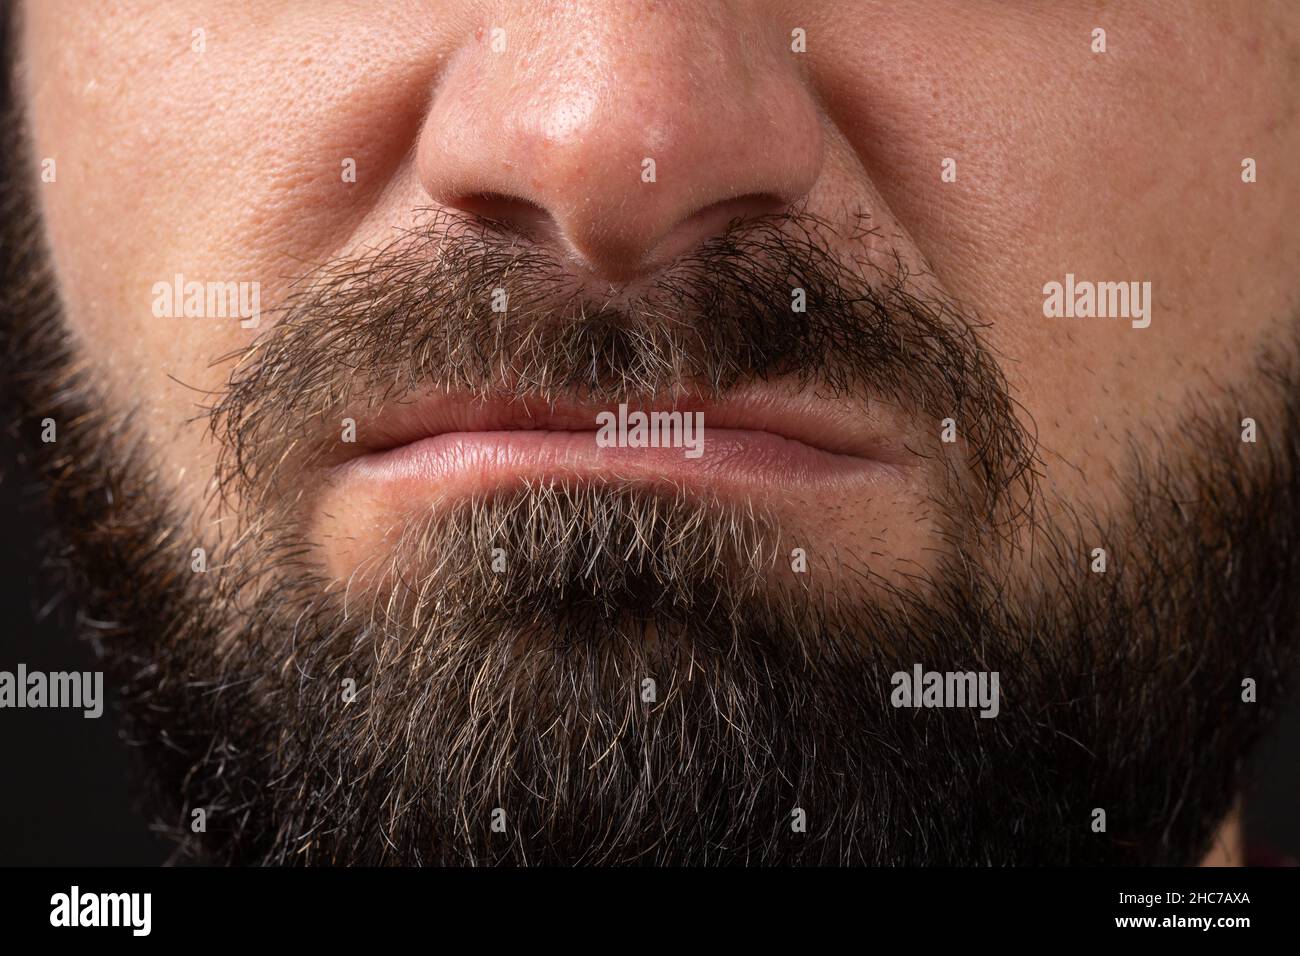 emotion of disgust, hatred close-up on face and lips of young unrecognizable man with black beard and mustache, concept of rage and anger Stock Photo